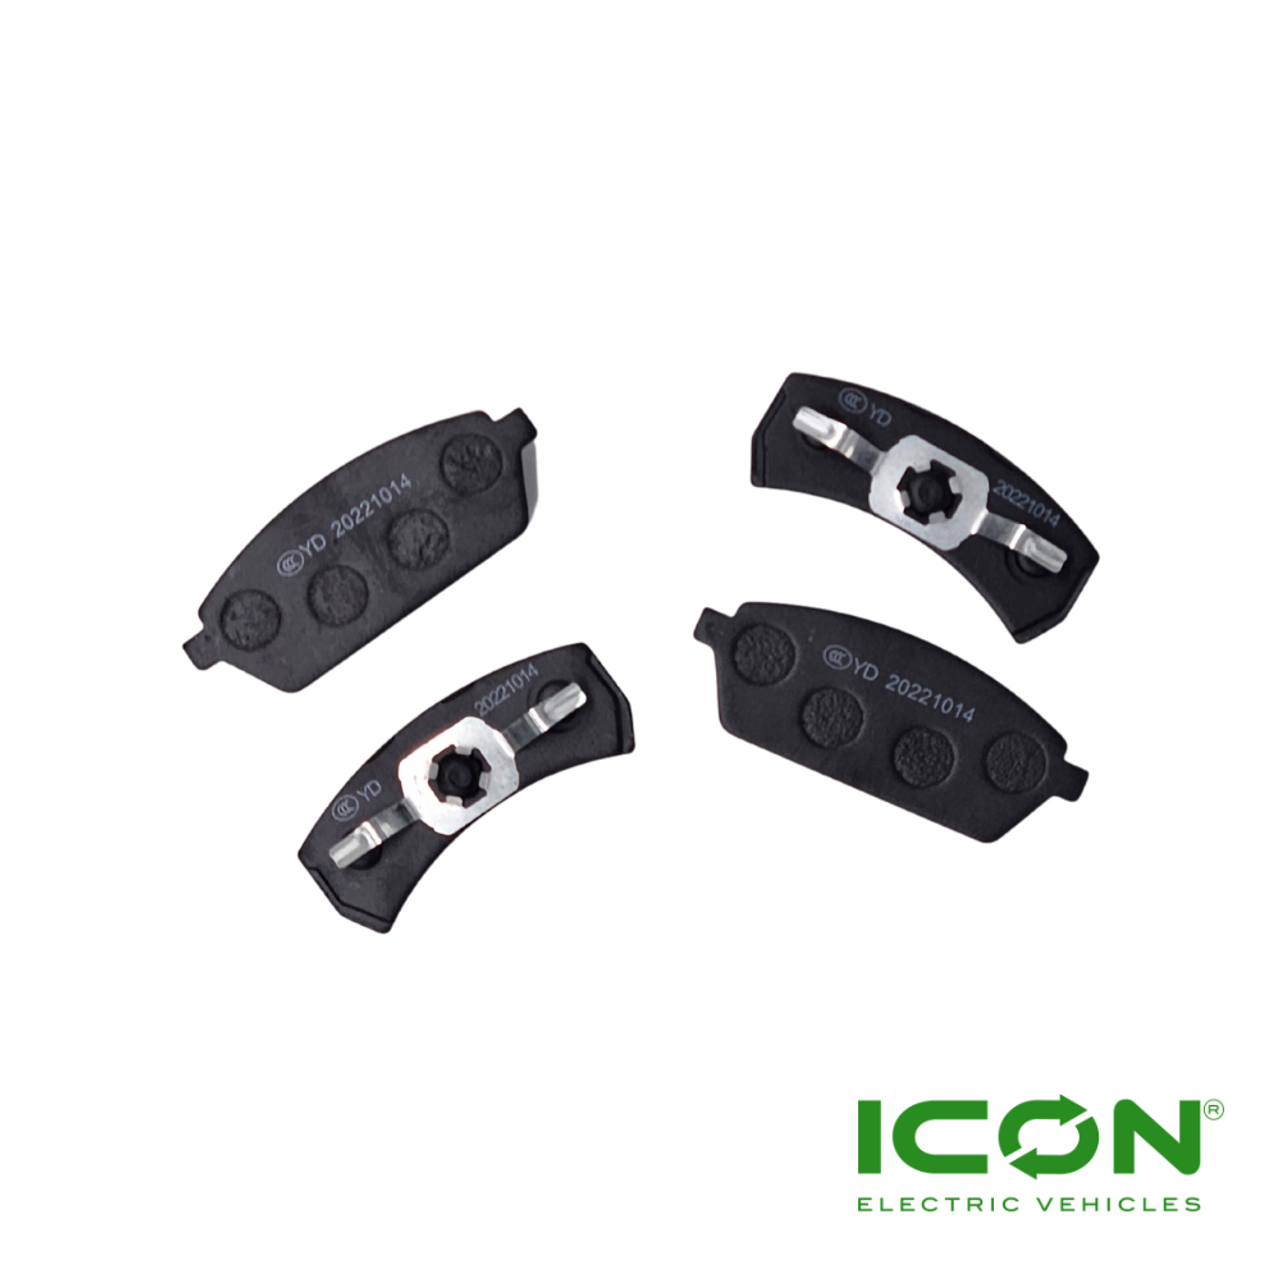 ICON Front Disc Brake Pads for ICON i20, i40, i60, i80 Model Golf Carts Full Replacement Front Set Driver & Passenger, BRAK-607-IC, 3.01.004.900087, 3.206.14.000022, 3.01.004.900088, 3.206.14.000021